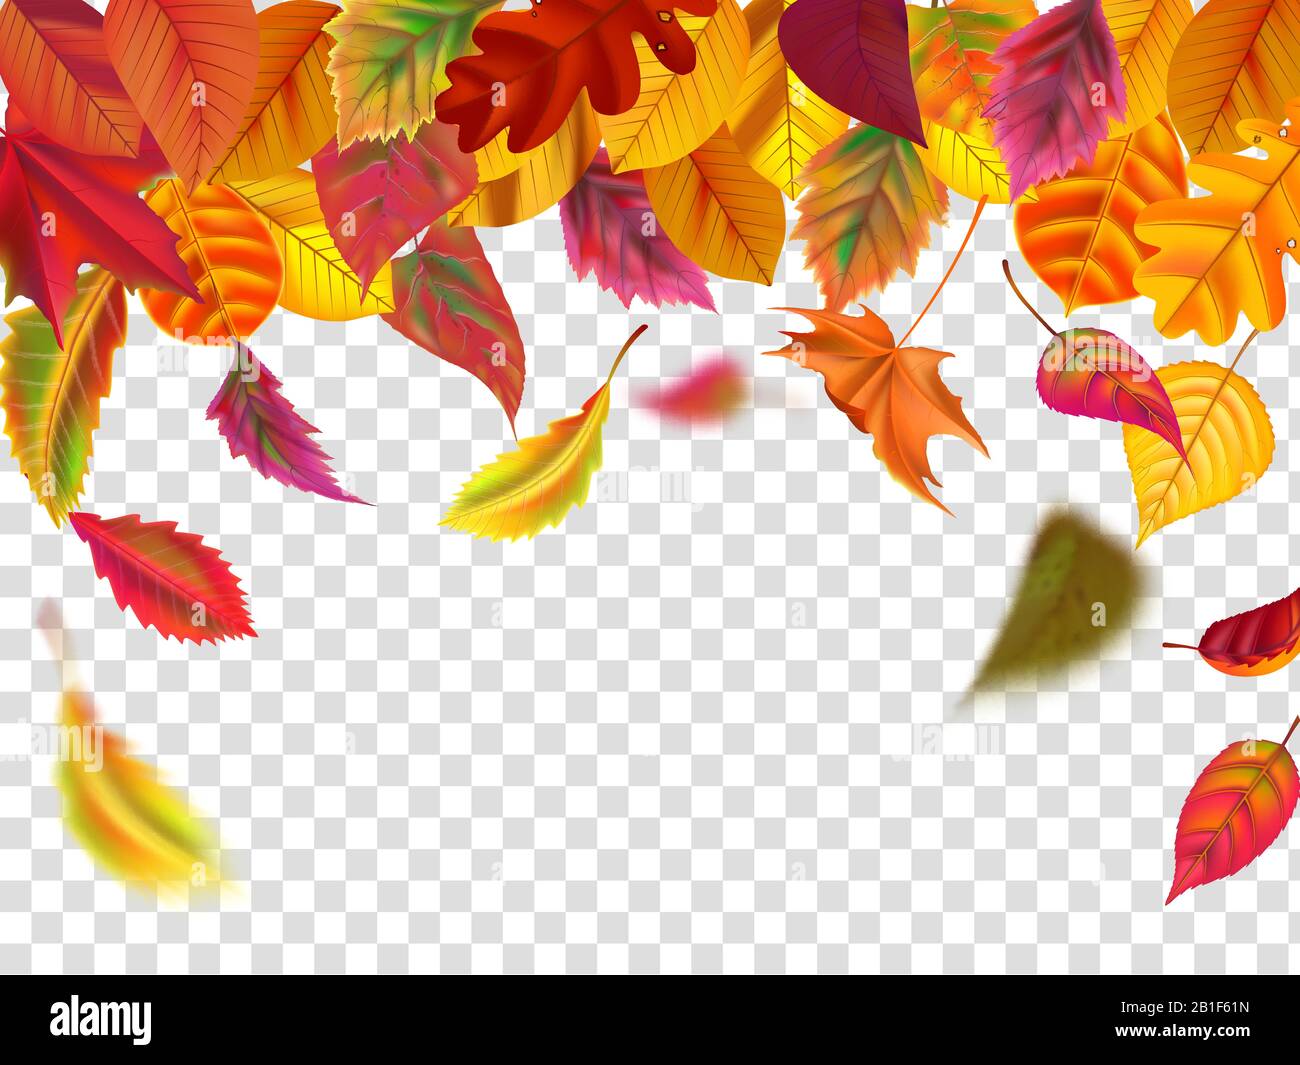 Autumn leaves fall. Falling blurred leaf, autumnal foliage fall and wind rises yellow leaves isolated vector illustration Stock Vector